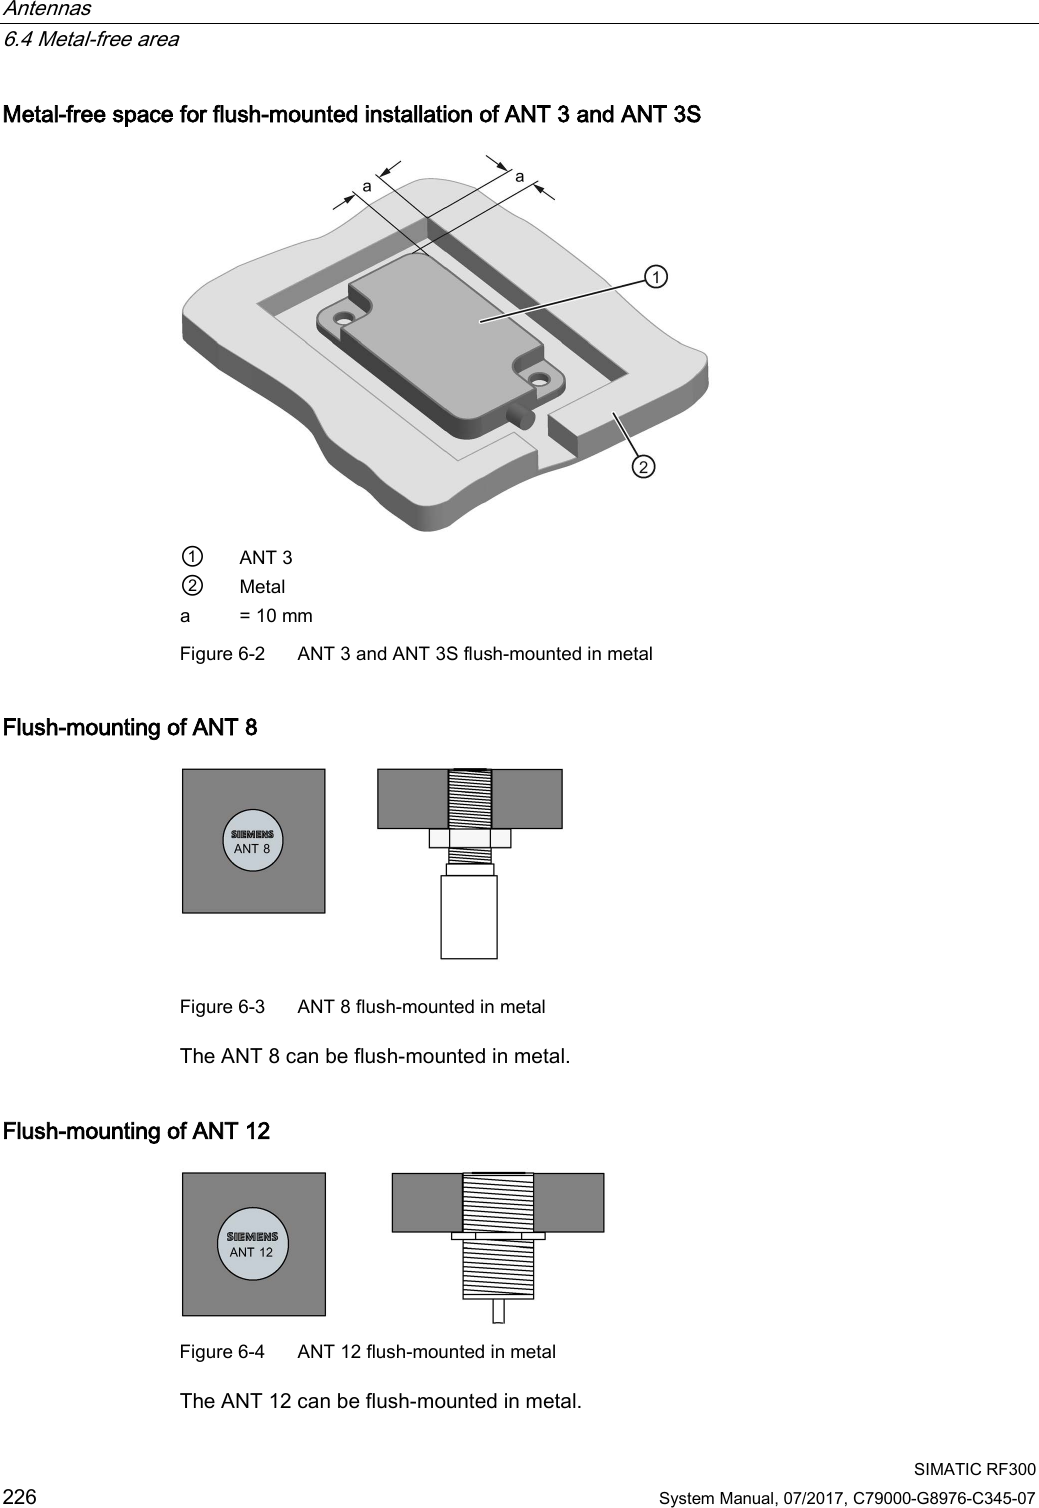 Antennas   6.4 Metal-free area  SIMATIC RF300 226 System Manual, 07/2017, C79000-G8976-C345-07 Metal-free space for flush-mounted installation of ANT 3 and ANT 3S  ① ANT 3 ② Metal a = 10 mm Figure 6-2  ANT 3 and ANT 3S flush-mounted in metal  Flush-mounting of ANT 8  Figure 6-3  ANT 8 flush-mounted in metal  The ANT 8 can be flush-mounted in metal. Flush-mounting of ANT 12  Figure 6-4  ANT 12 flush-mounted in metal  The ANT 12 can be flush-mounted in metal. 